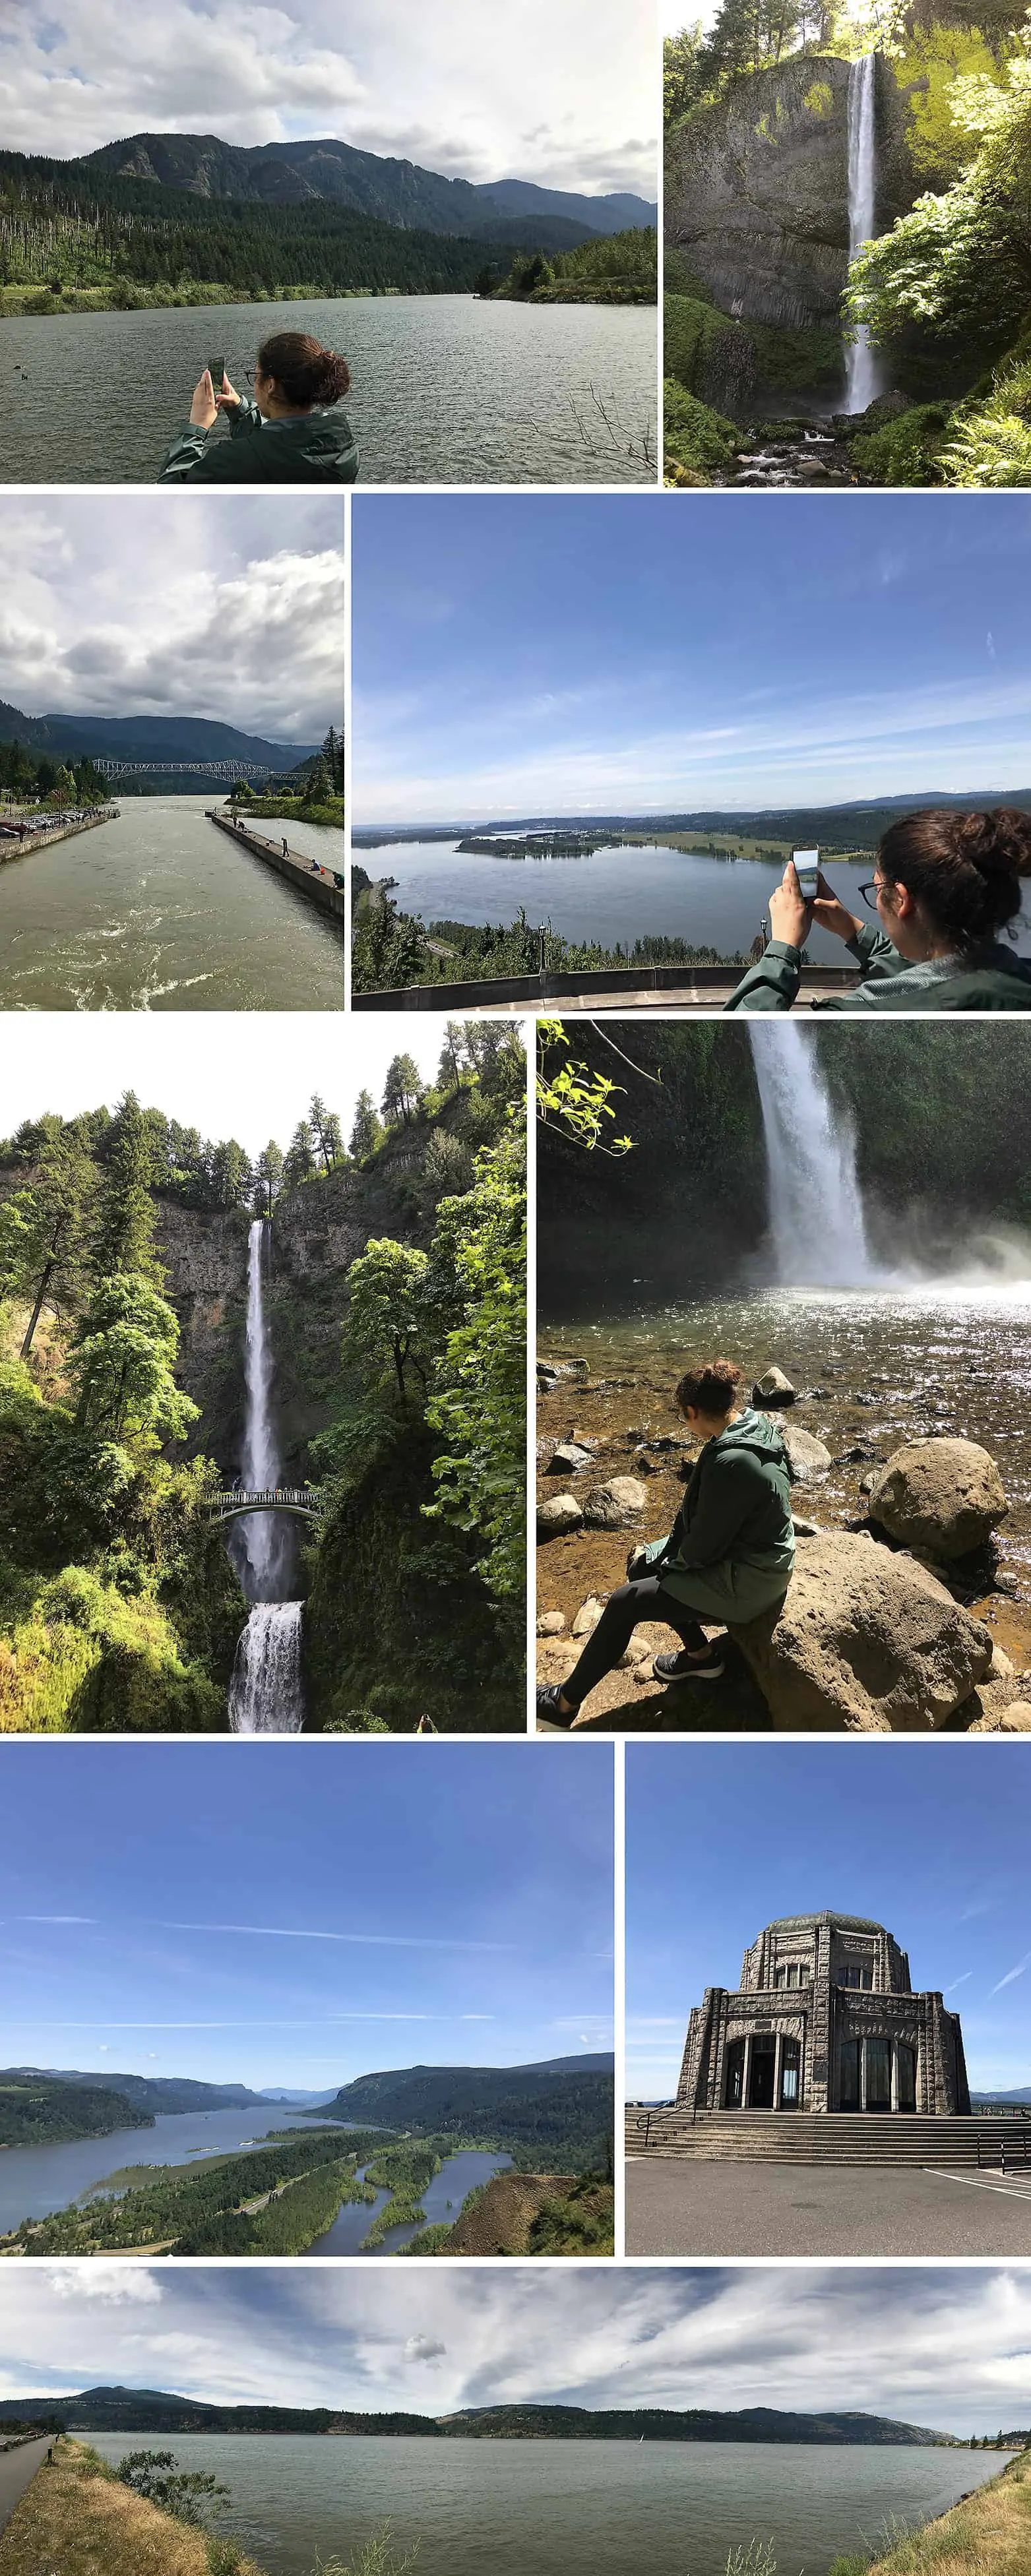 Multnomah Falls and other waterfalls with Gorge Views